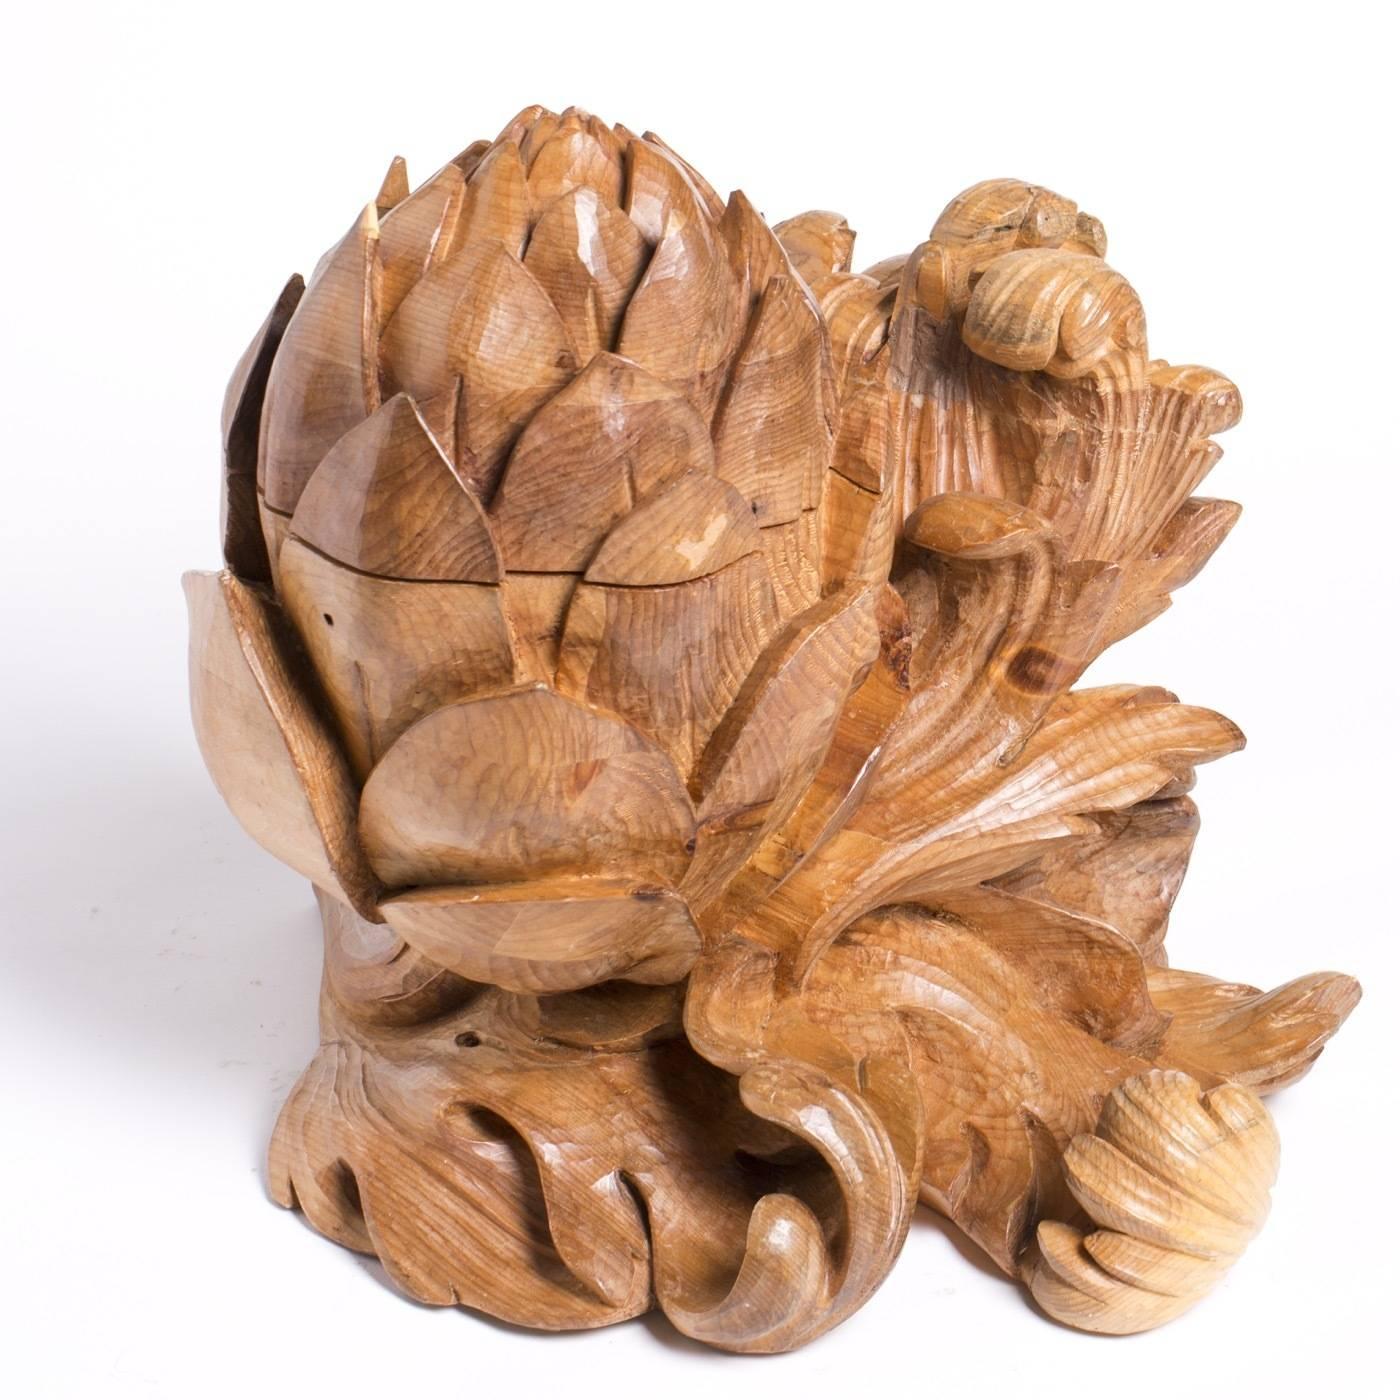 Ornamental ice bucket by Bartolozzi e Maioli in Austrian pinewood. The hand-carved acorn form is decorated with elegant detail in high relief. Originally designed in the 1970s for a private residence in Texas.